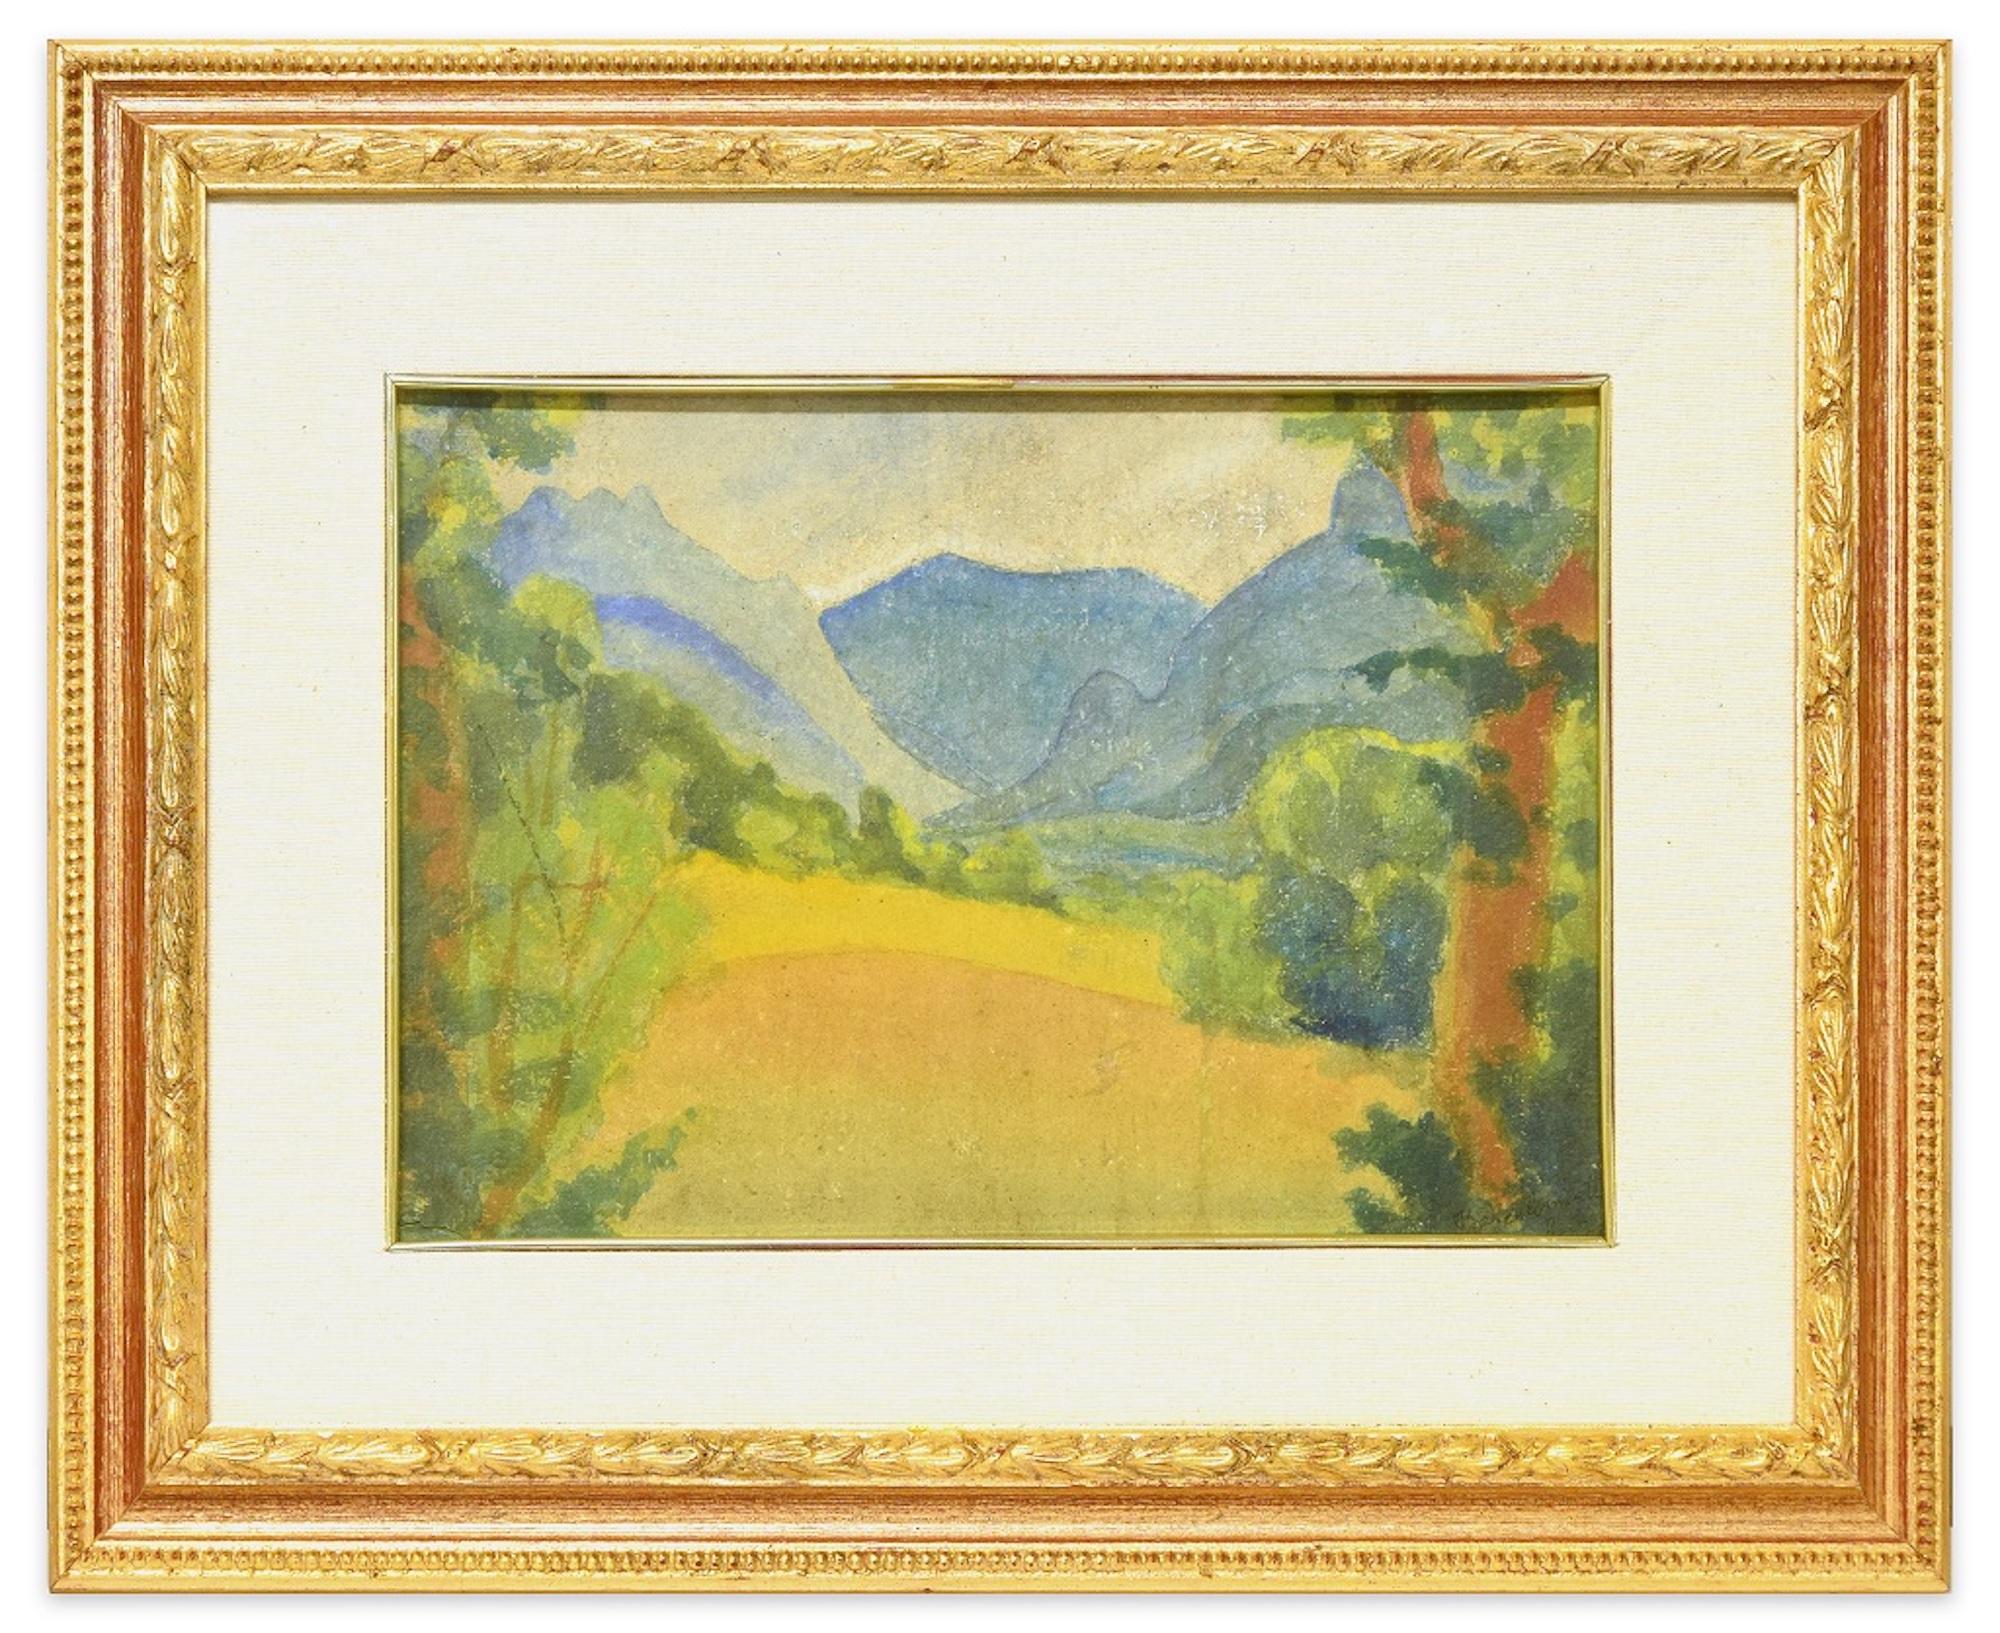 Blue Mountains - Original Watercolor on Panel by Marius Carion - 1931